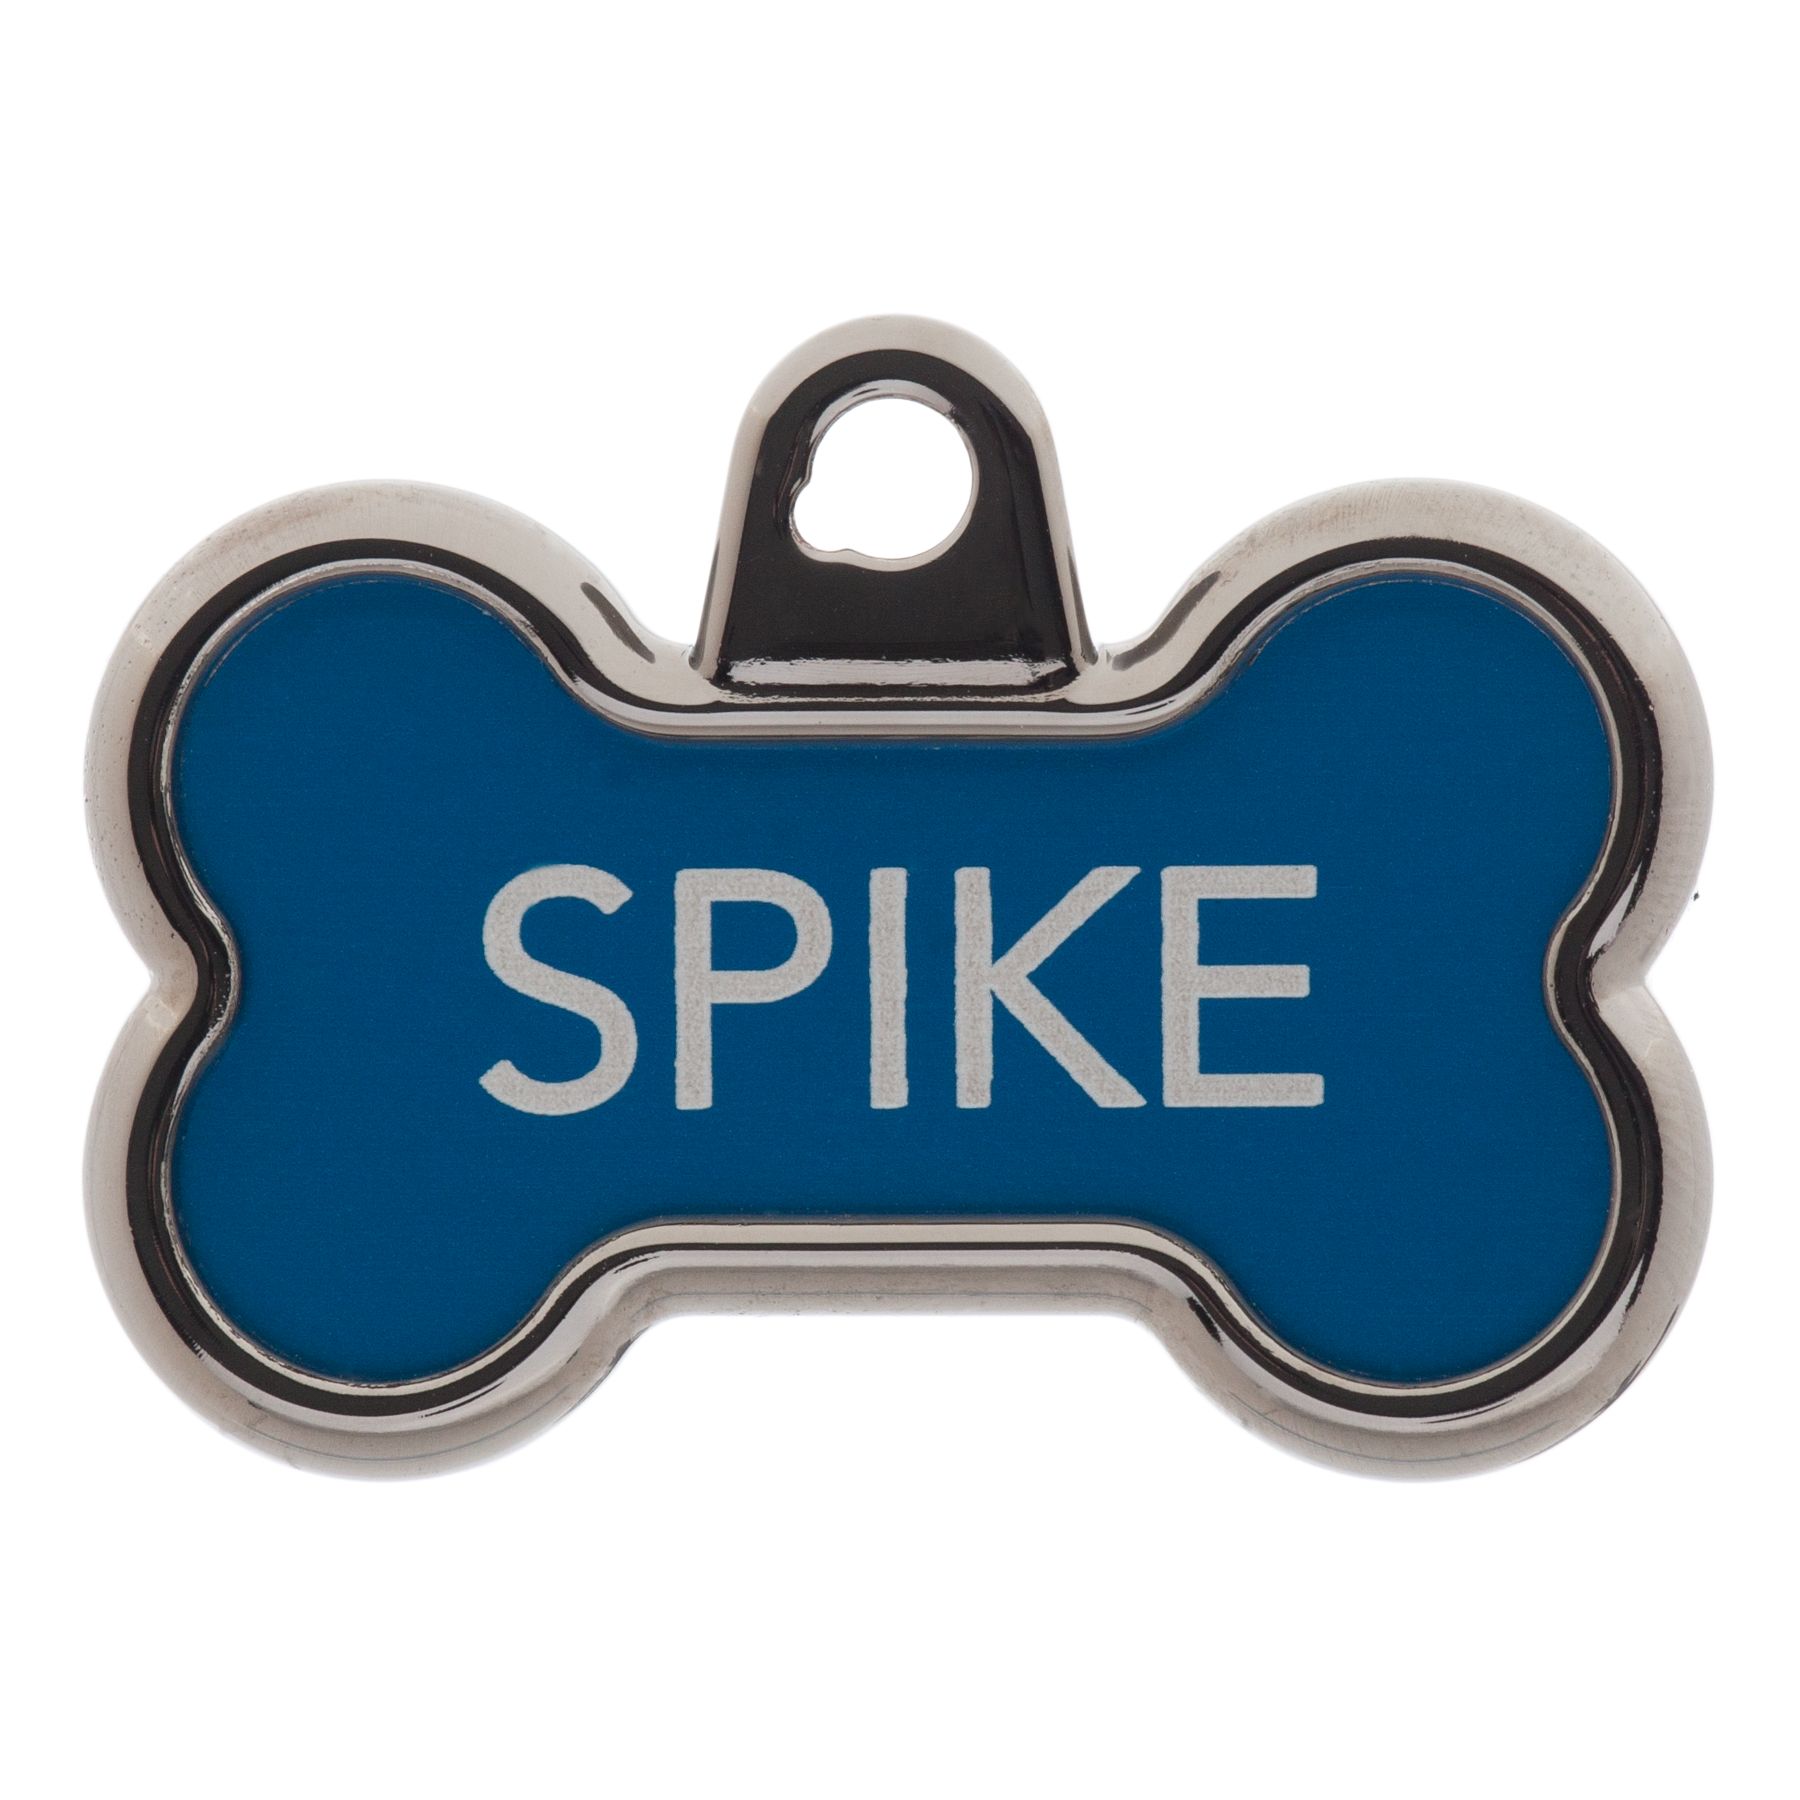 Military Dog Tags and Custom Pet ID Tags Sold Here